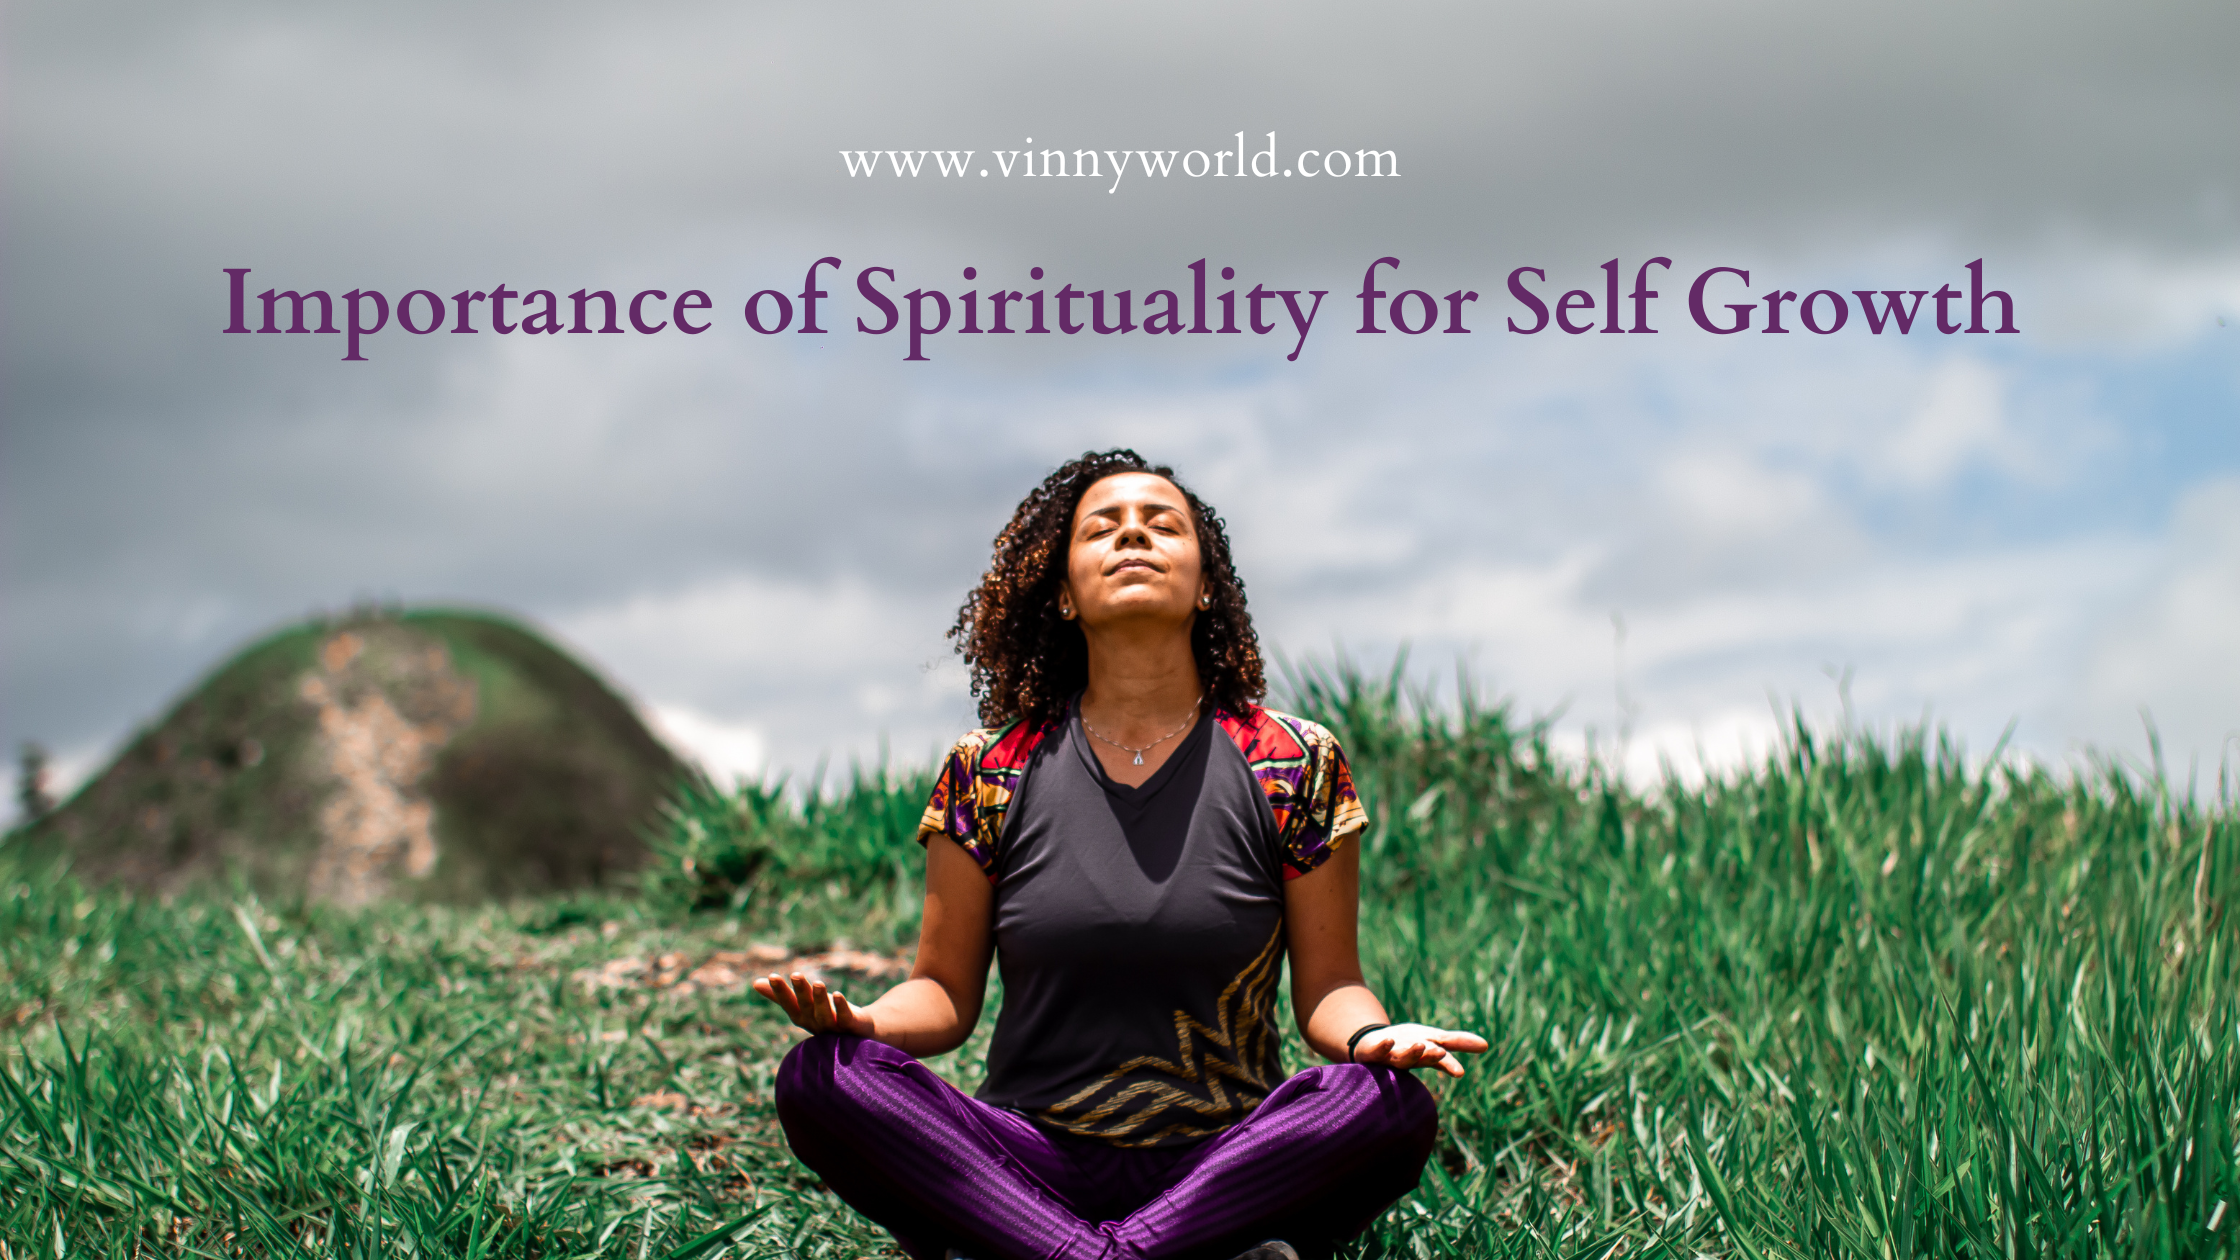 Importance of spirituality for self-growth